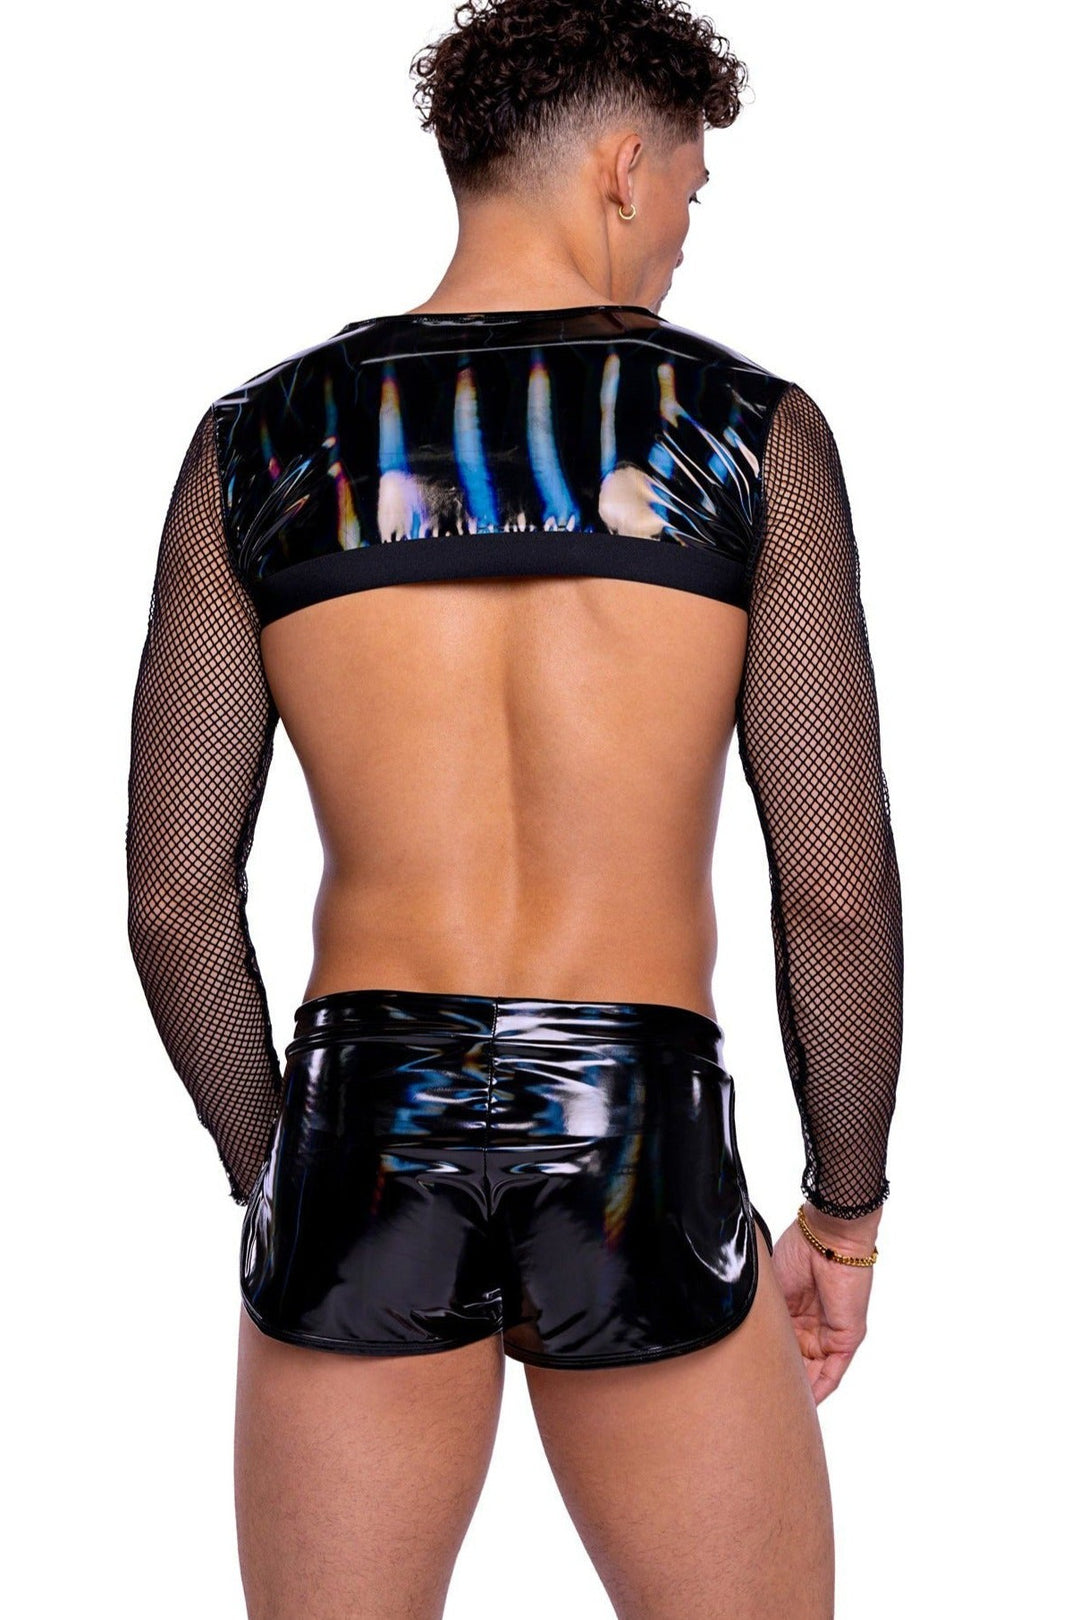 Vinyl with Iridescent Print Runner Shorts with Drawstring